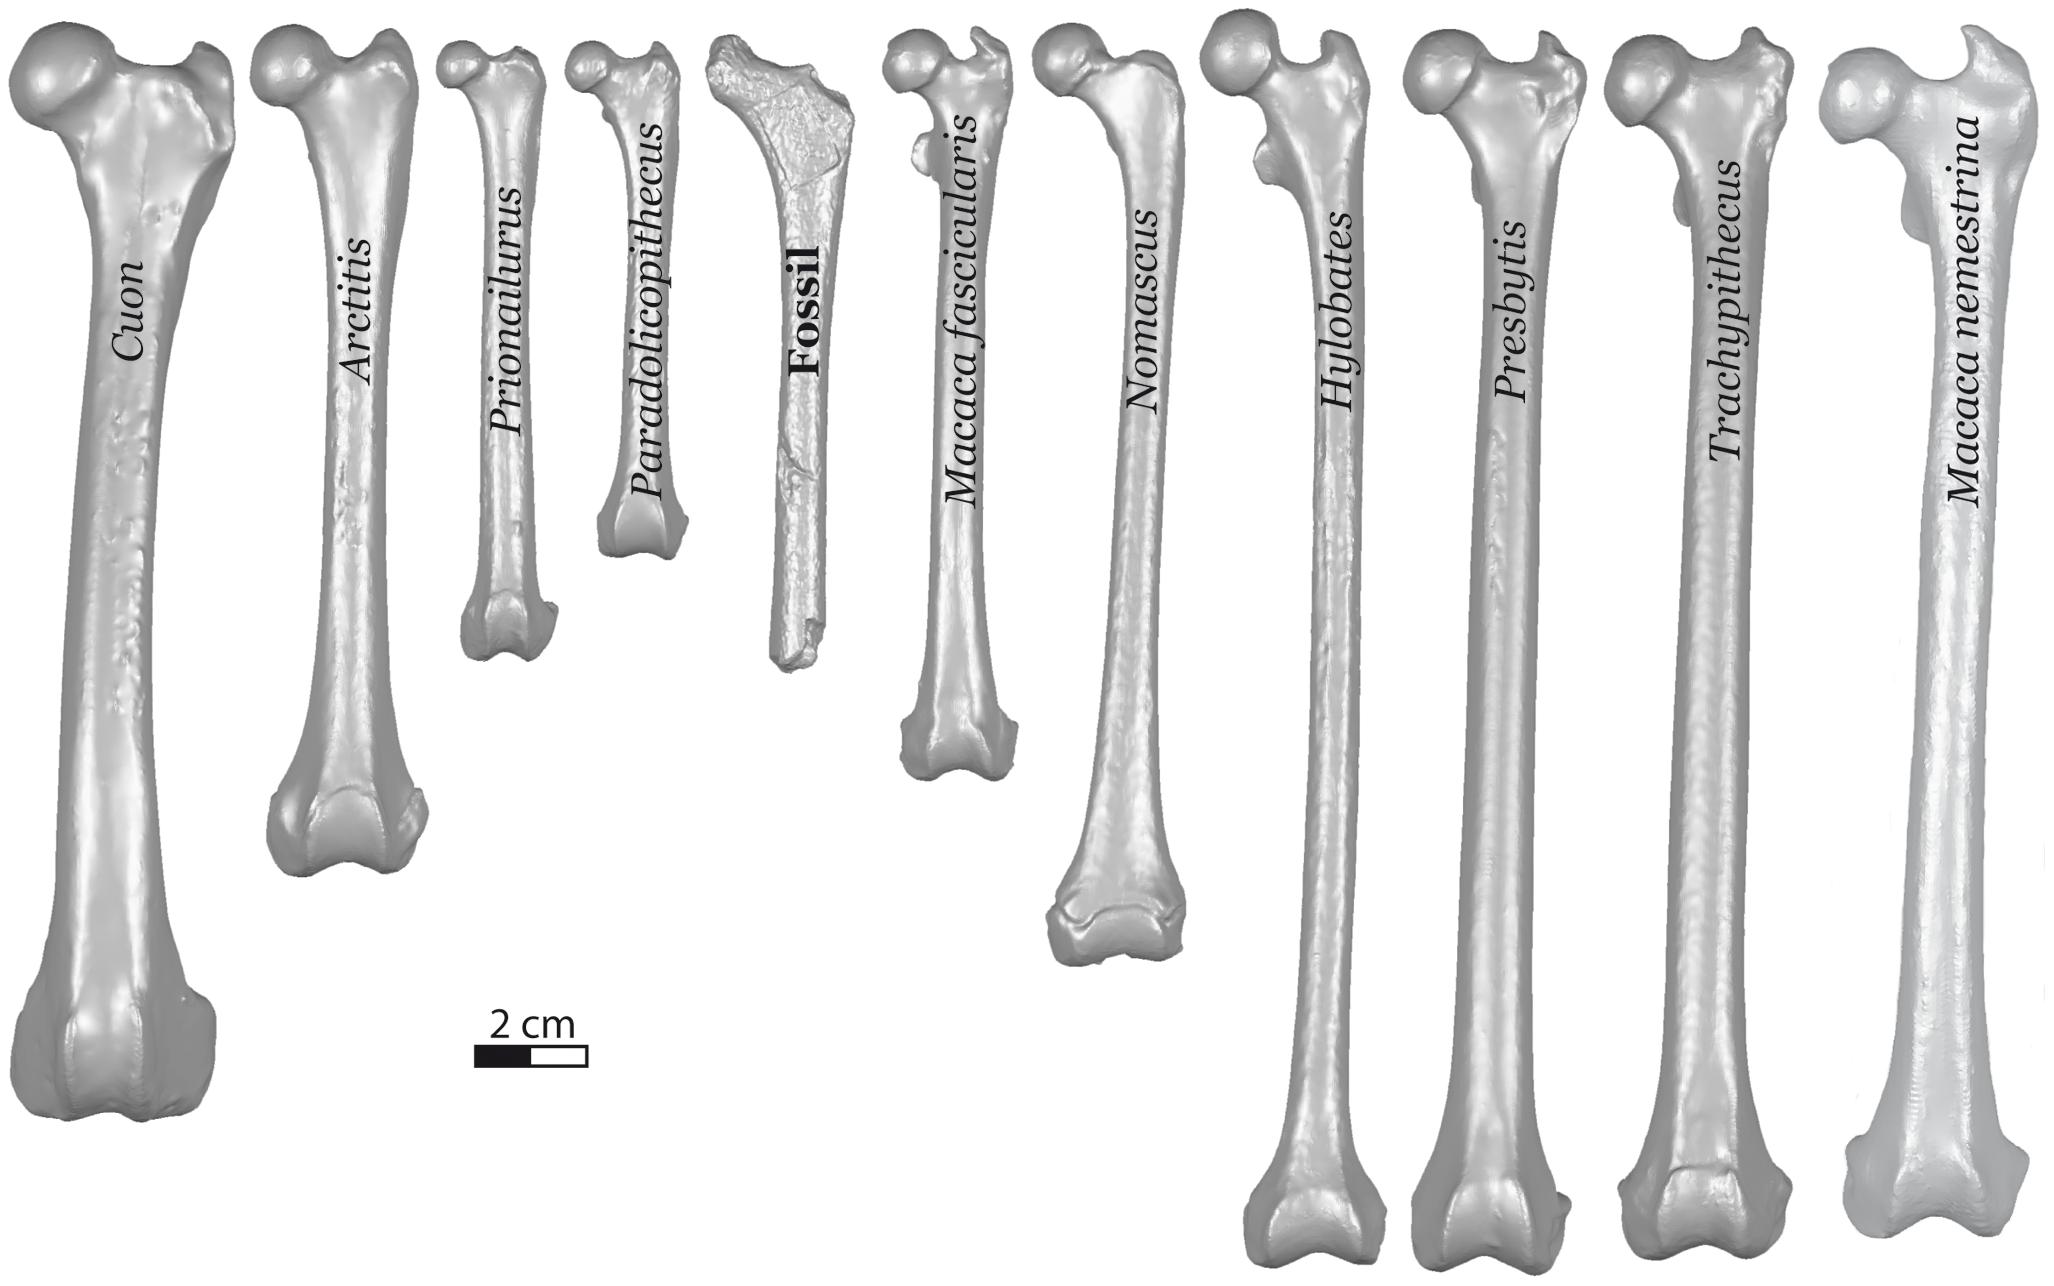 Figure 4 Comparison of the Trinil 5703 fossil femur (center) in anterior view with the femora of Southeast Asian carnivores (on the left side of Trinil 5703) and primates (on the right side of Trinil 5703).